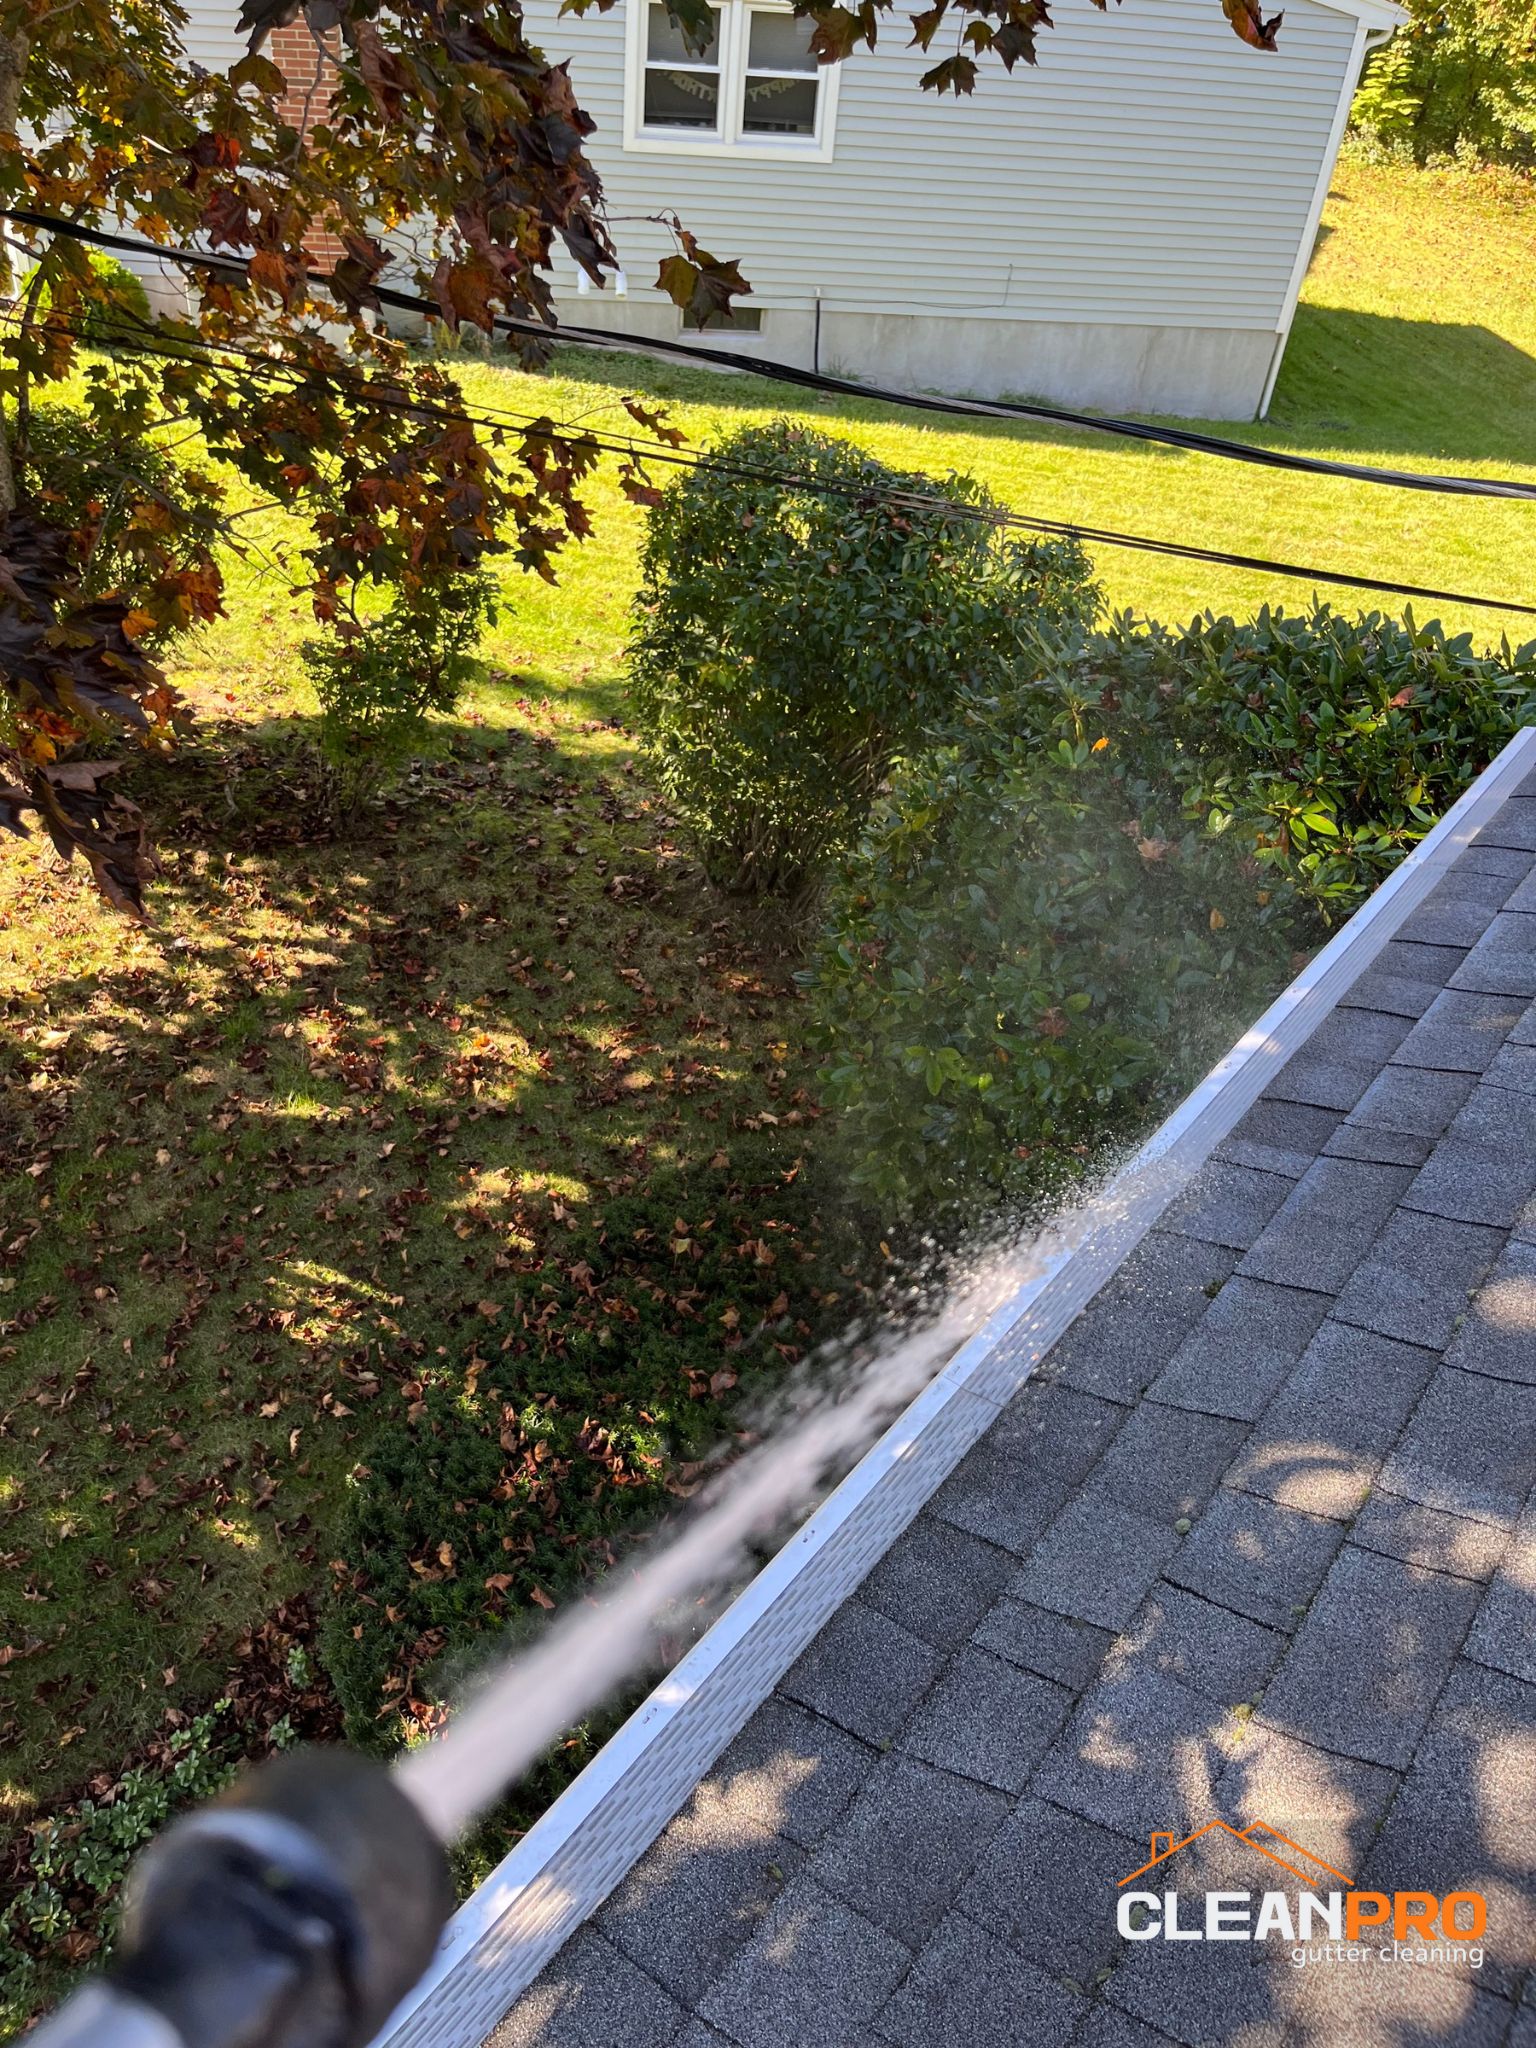 Residential Gutter Cleaning in Greenville NC